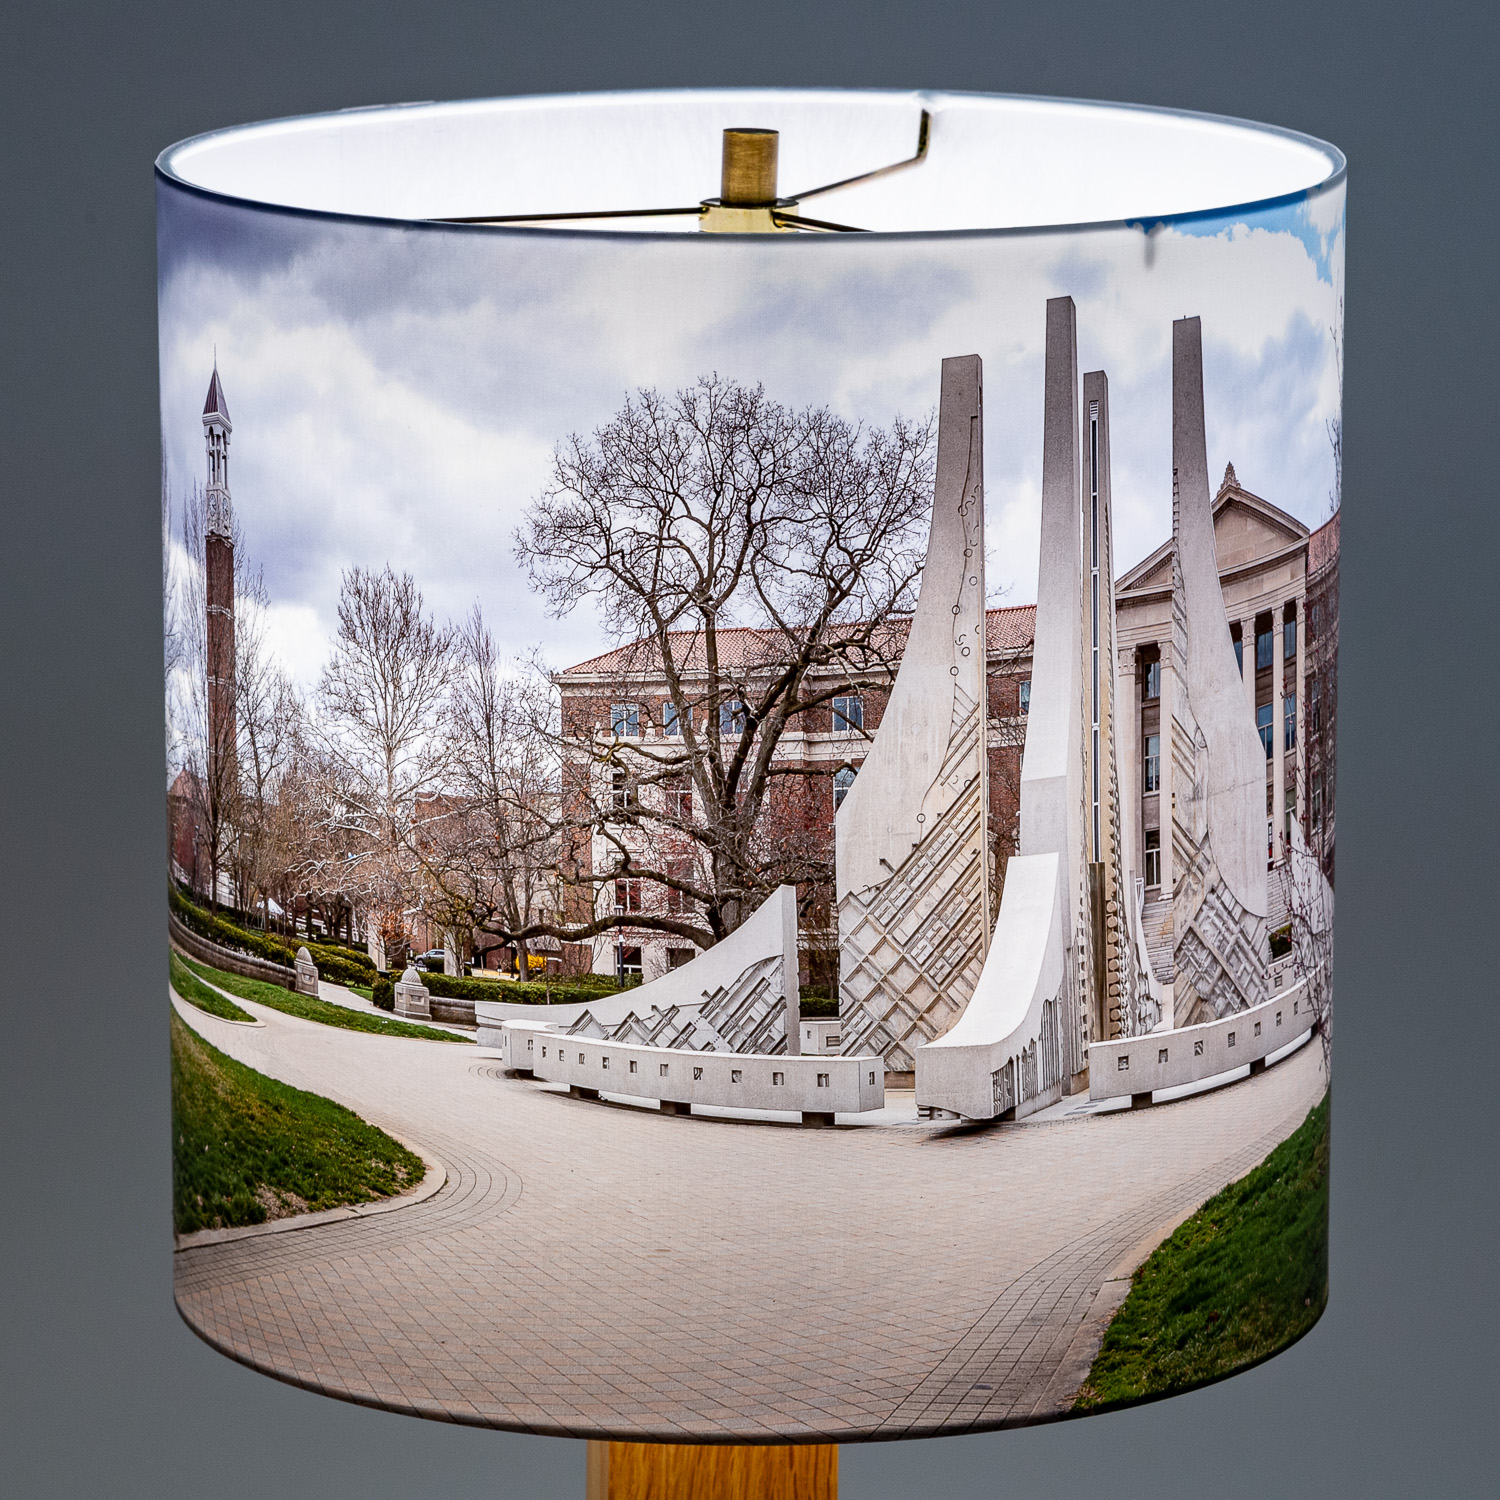 121: Purdue University fountain, bell tower, Hovde on Engineering mall -- Photo on Lamp shade by David Elmore